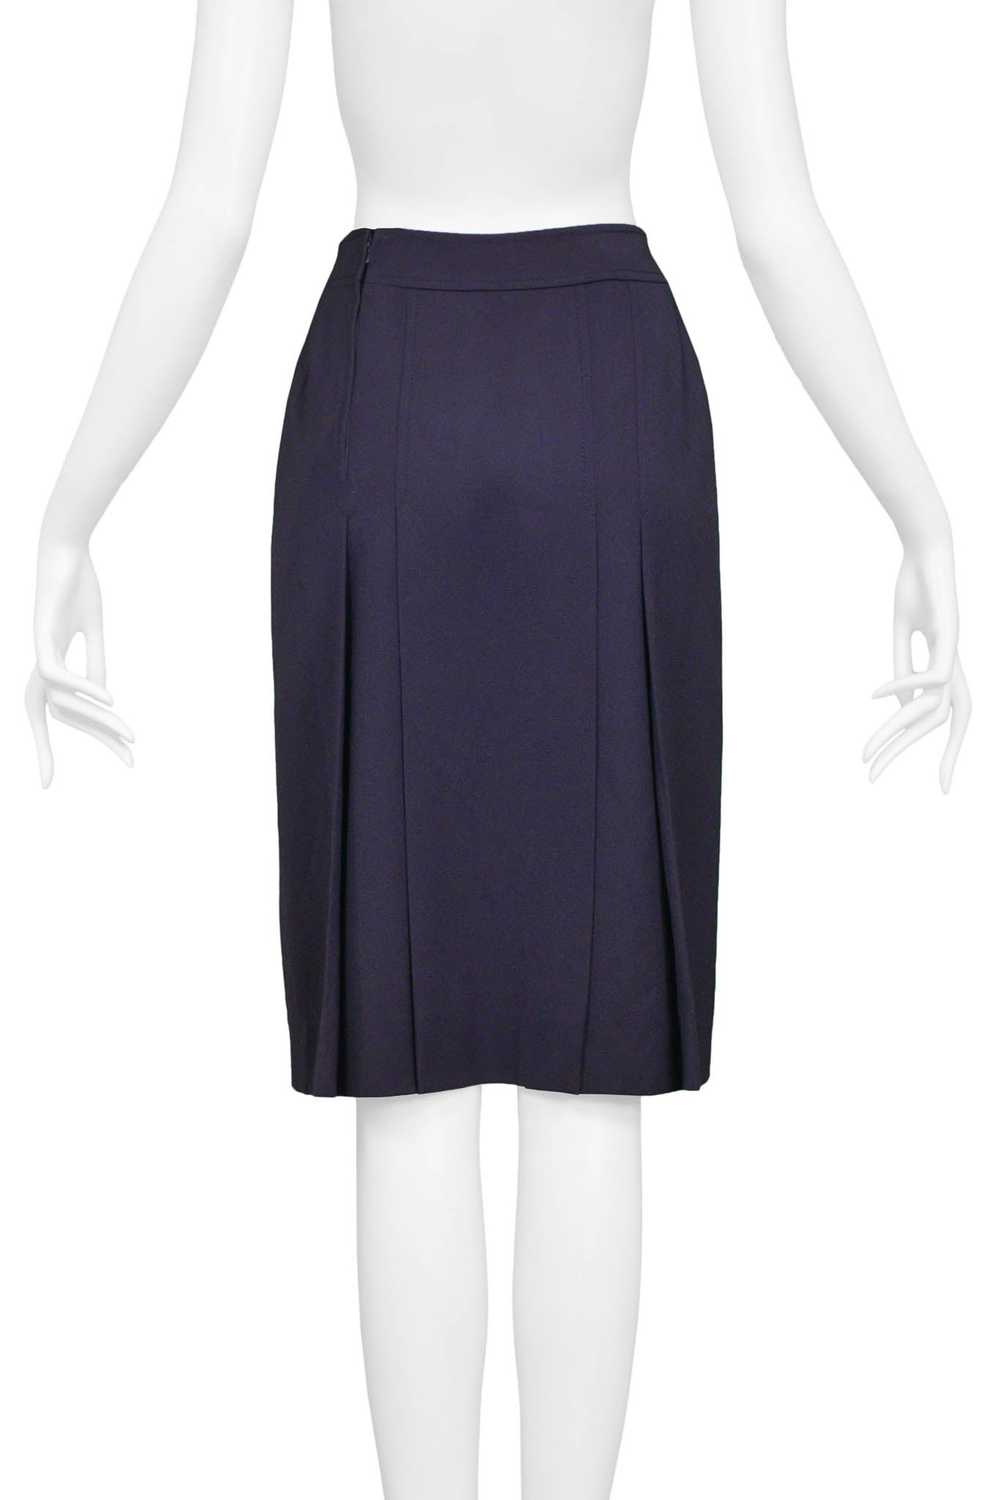 CELINE NAVY PURPLE WOOL SKIRT WITH GOLD LINK - image 4